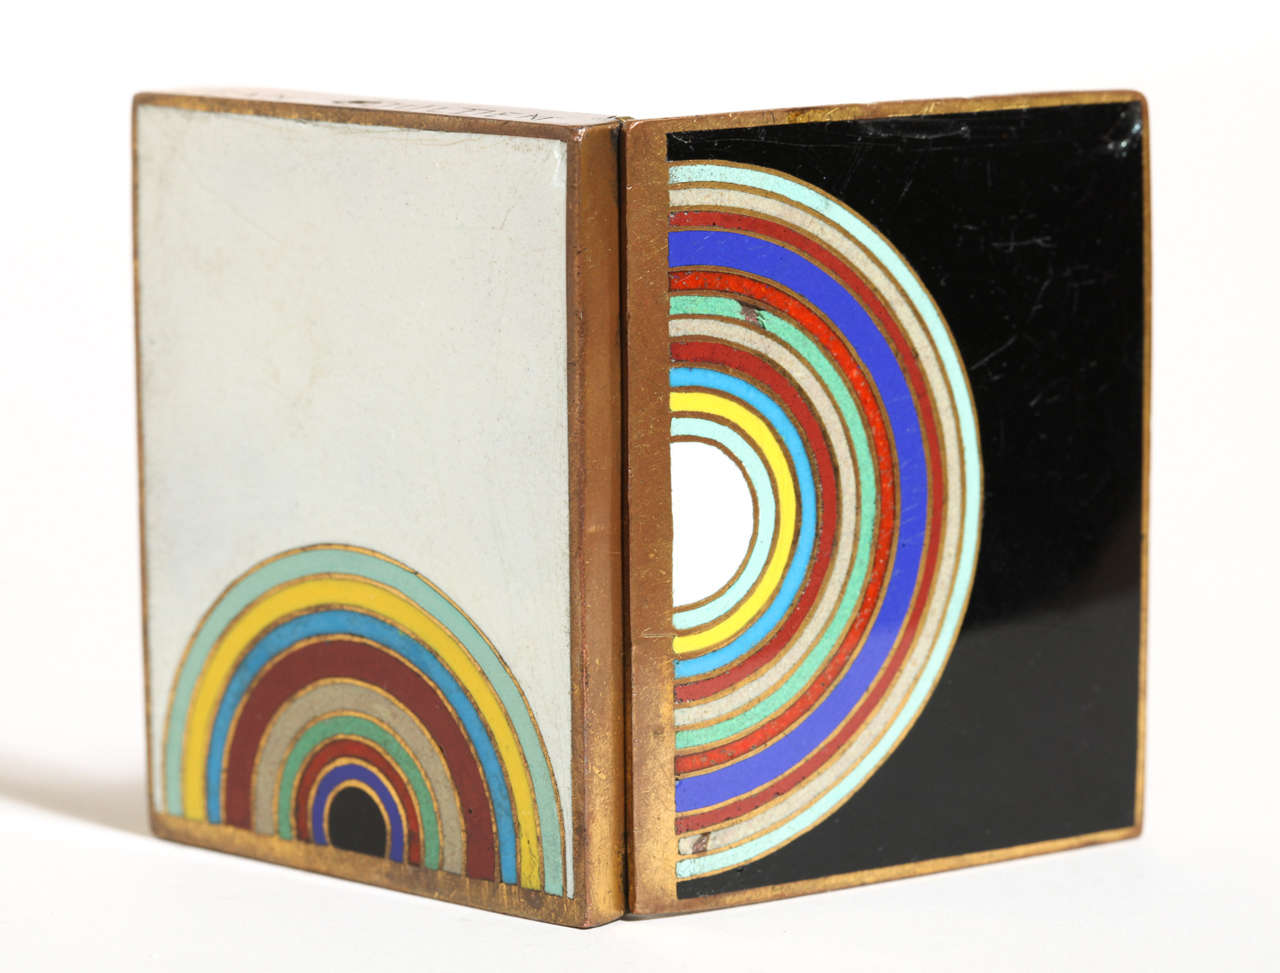 Champlevé Jean Goulden French Art Deco Copper and Champlevé Enamel Multi-colored Box For Sale